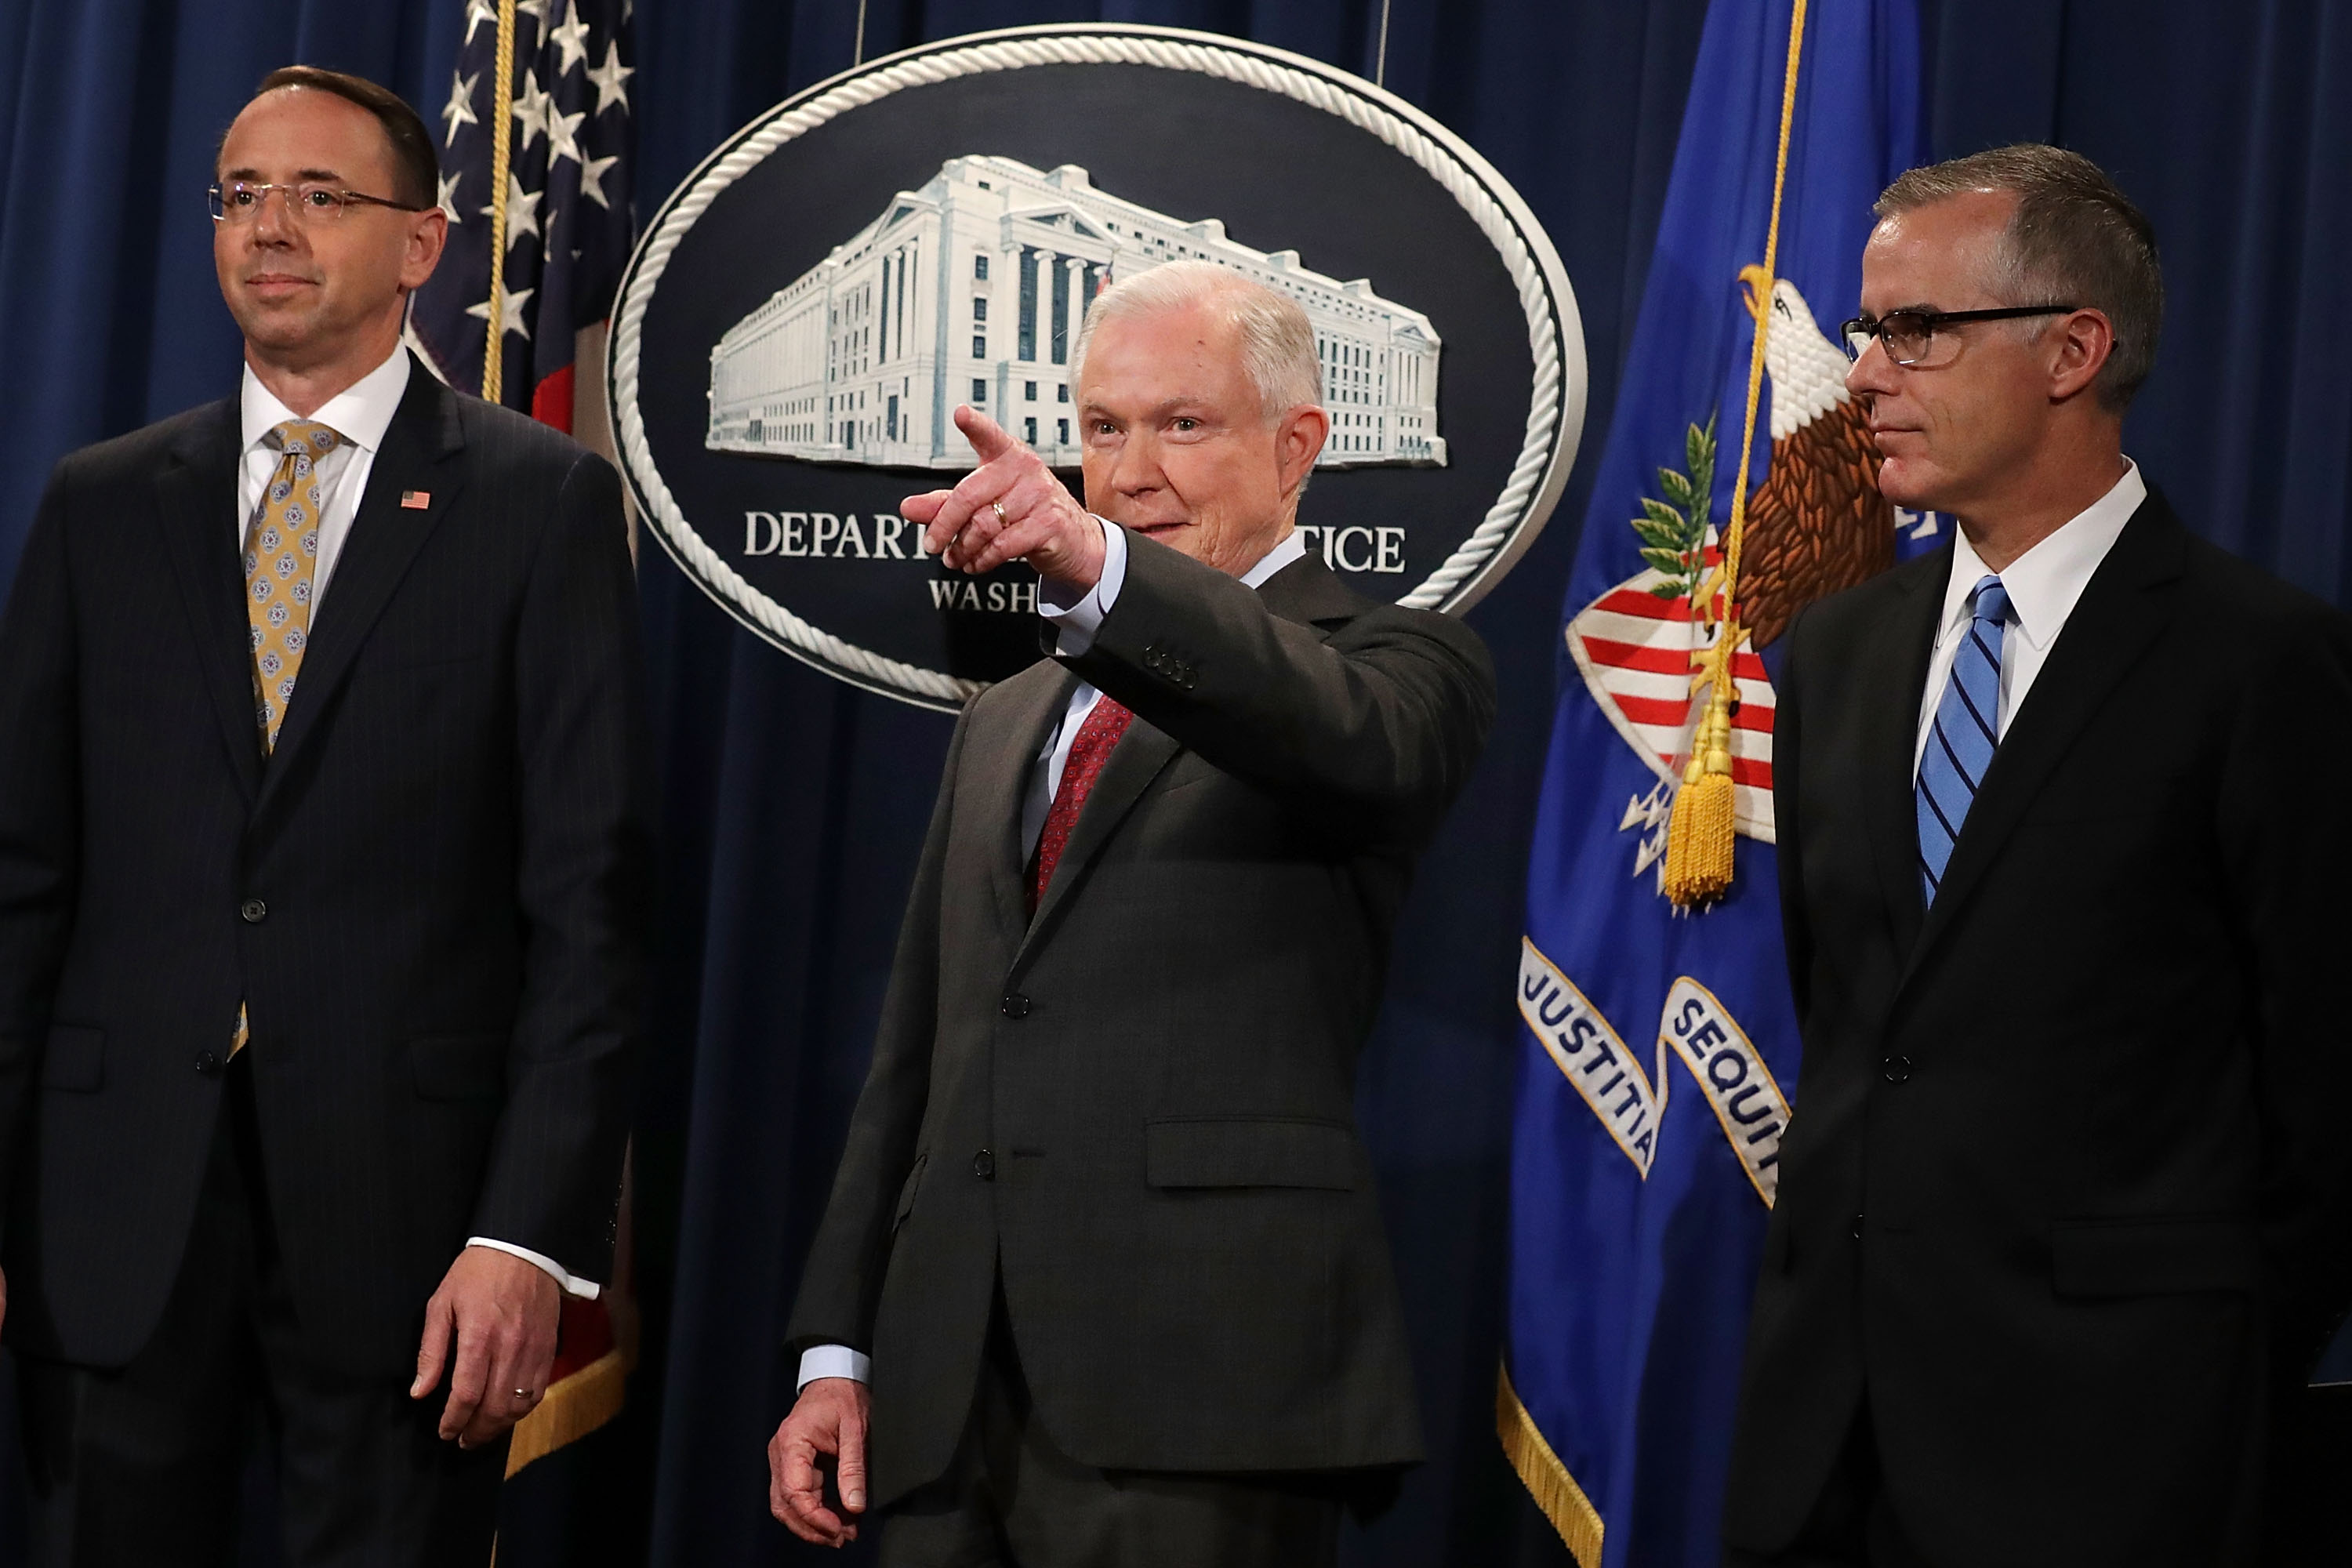 (L-R) Deputy Attorney General Rod Rosenstein, U.S. Attorney General Jeff Sessions, Acting FBI Director Andrew McCabe other law enforcement officials hold a news conference to announce an 'international cybercrime enforcement action' at the Department of Justice July 20, 2017 in Washington, DC. (Photo by Chip Somodevilla/Getty Images)